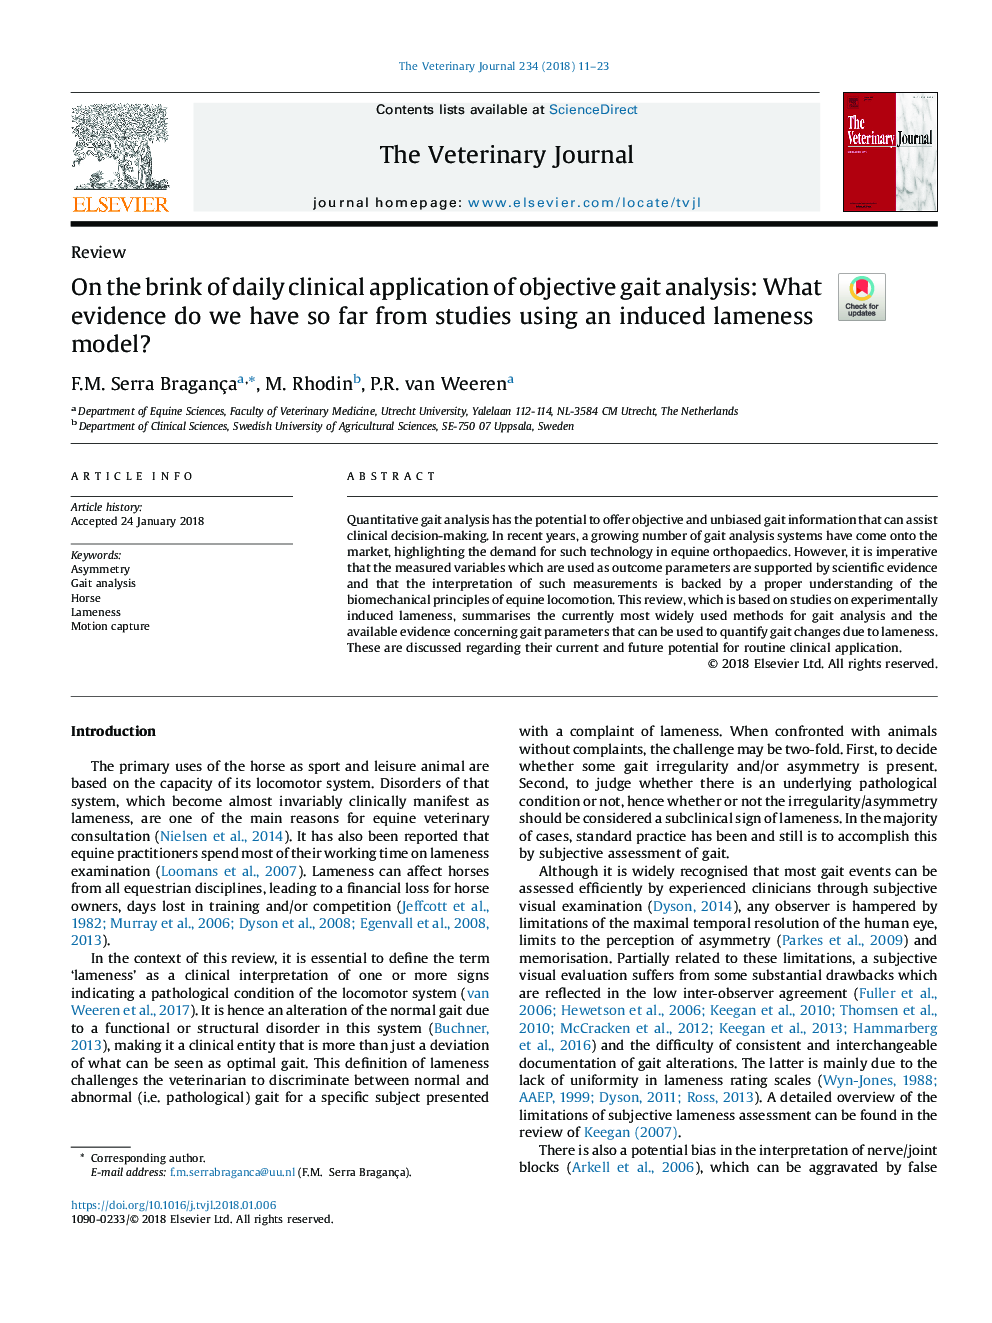 On the brink of daily clinical application of objective gait analysis: What evidence do we have so far from studies using an induced lameness model?